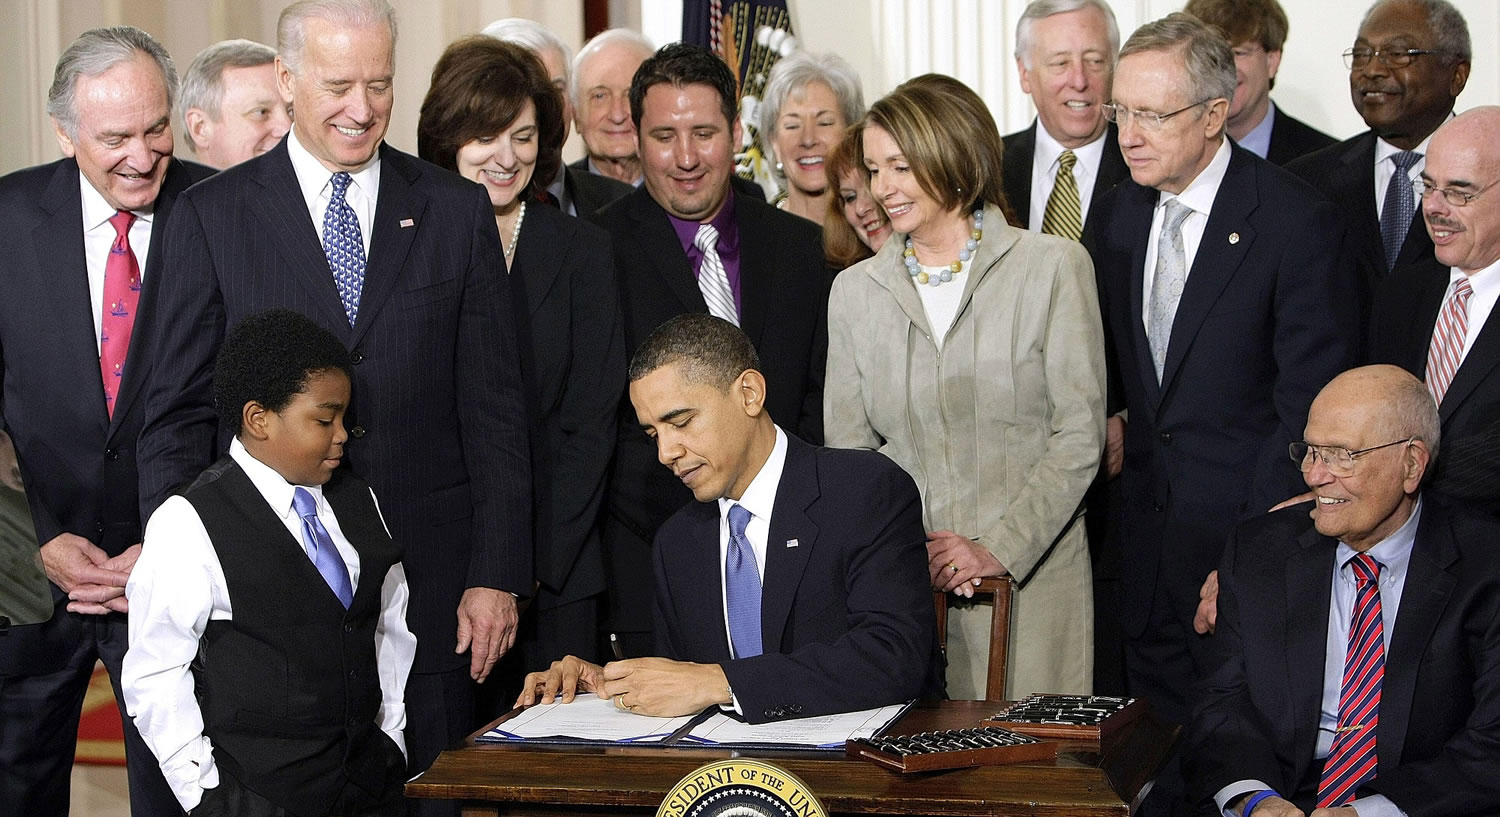 President Barack Obama signs the health care bill in 2010  in the East Room of the White House in Washington.